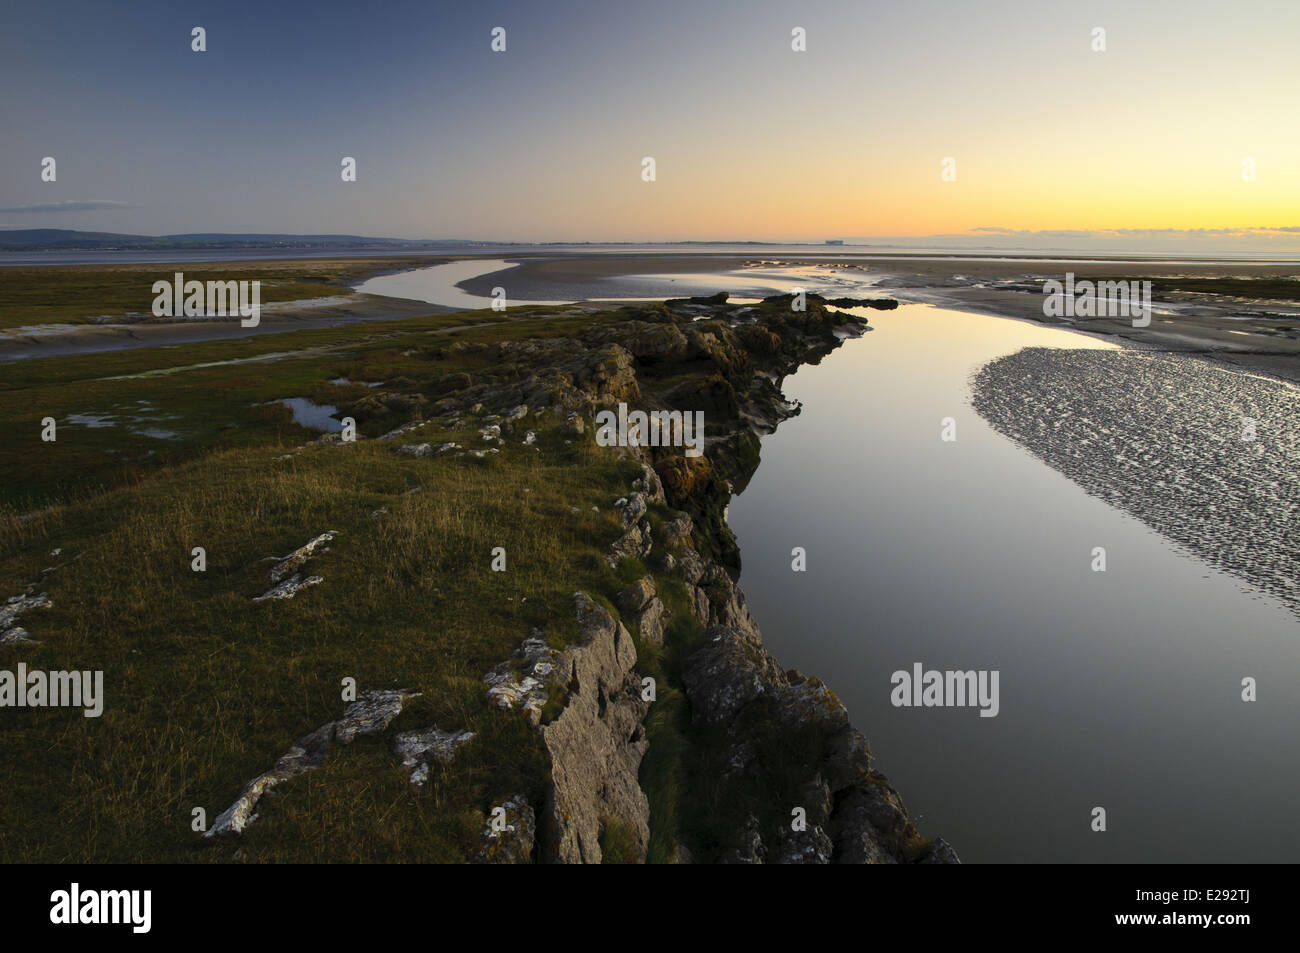 View of spit projecting into bay at dusk, Humphrey Head, Morecambe Bay, Cumbria, England, December Stock Photo